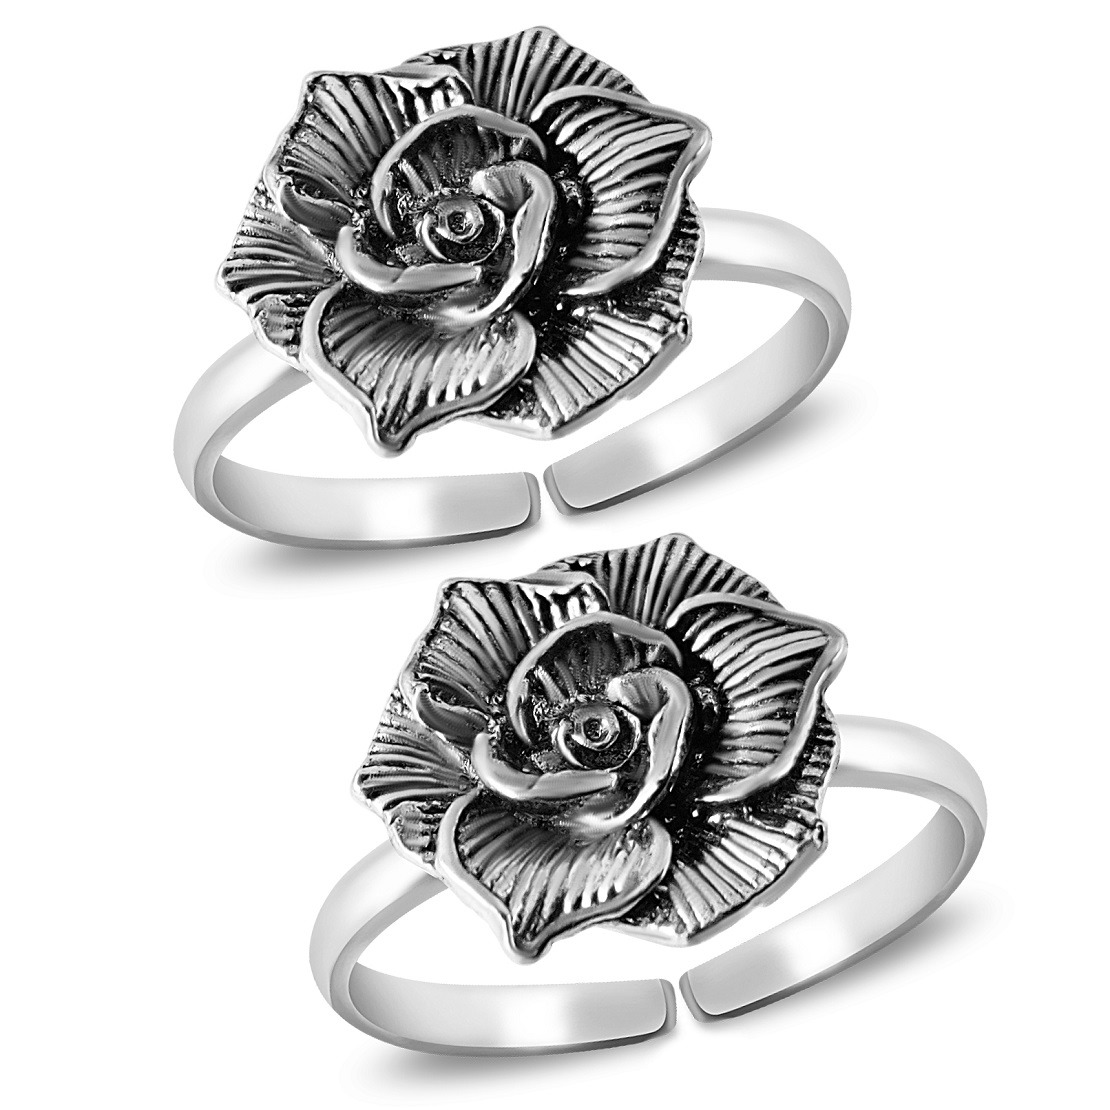 Ethiopian Dubai Rose Gold Flower Wedding Rings For Women And Girls Simple Flower  Design, Trendy Jewelry For Parties From Tiandiqz, $7.2 | DHgate.Com